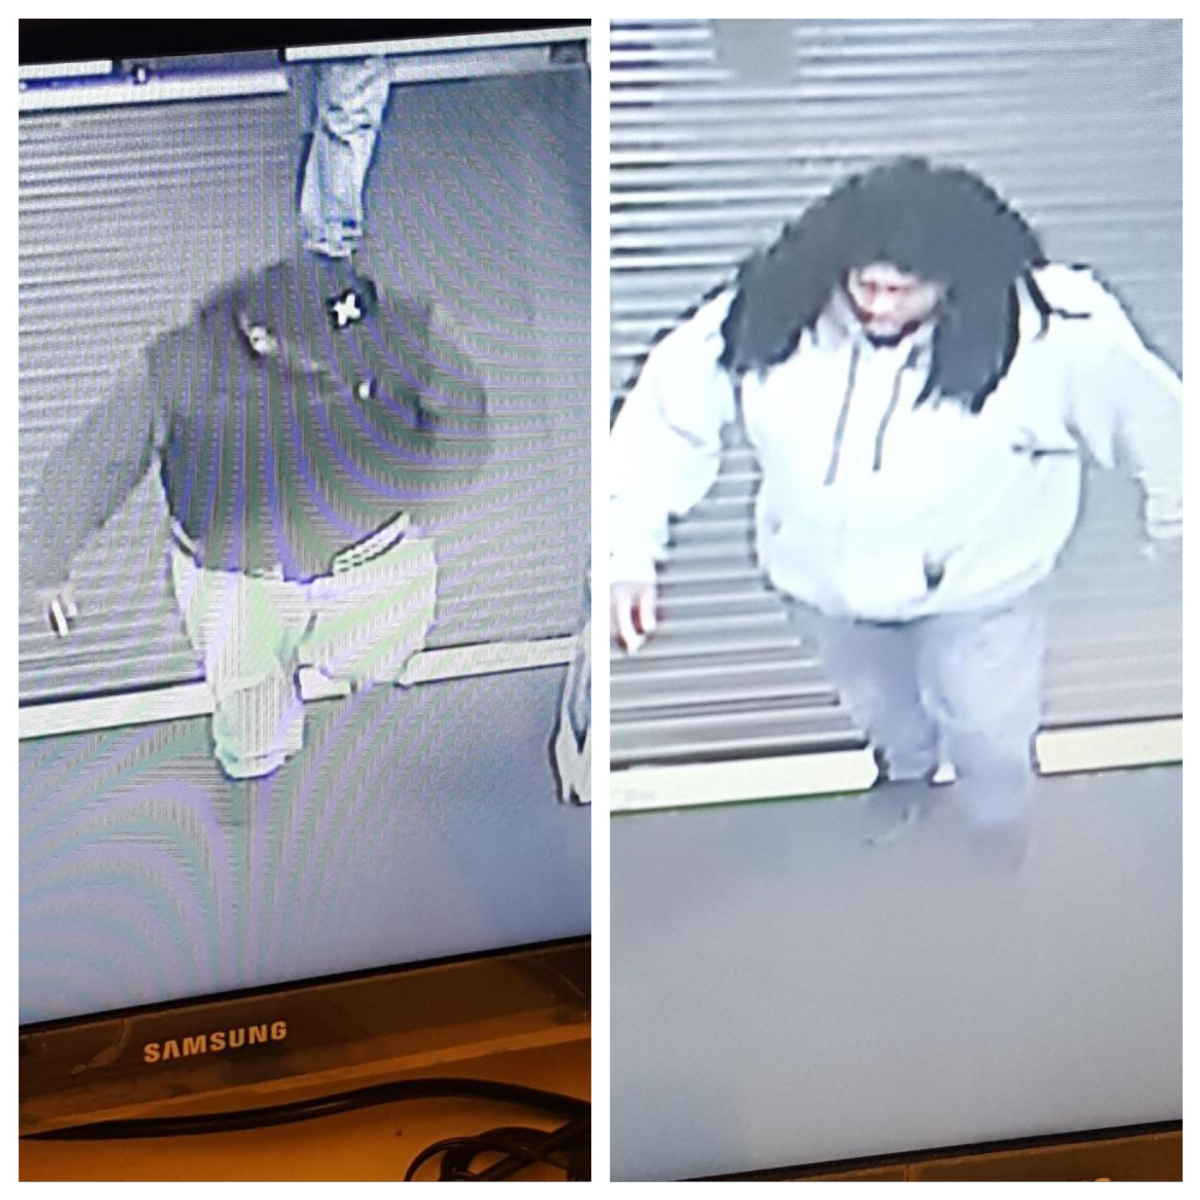 Best Buy Robbed in Elk Grove, Suspects At Large